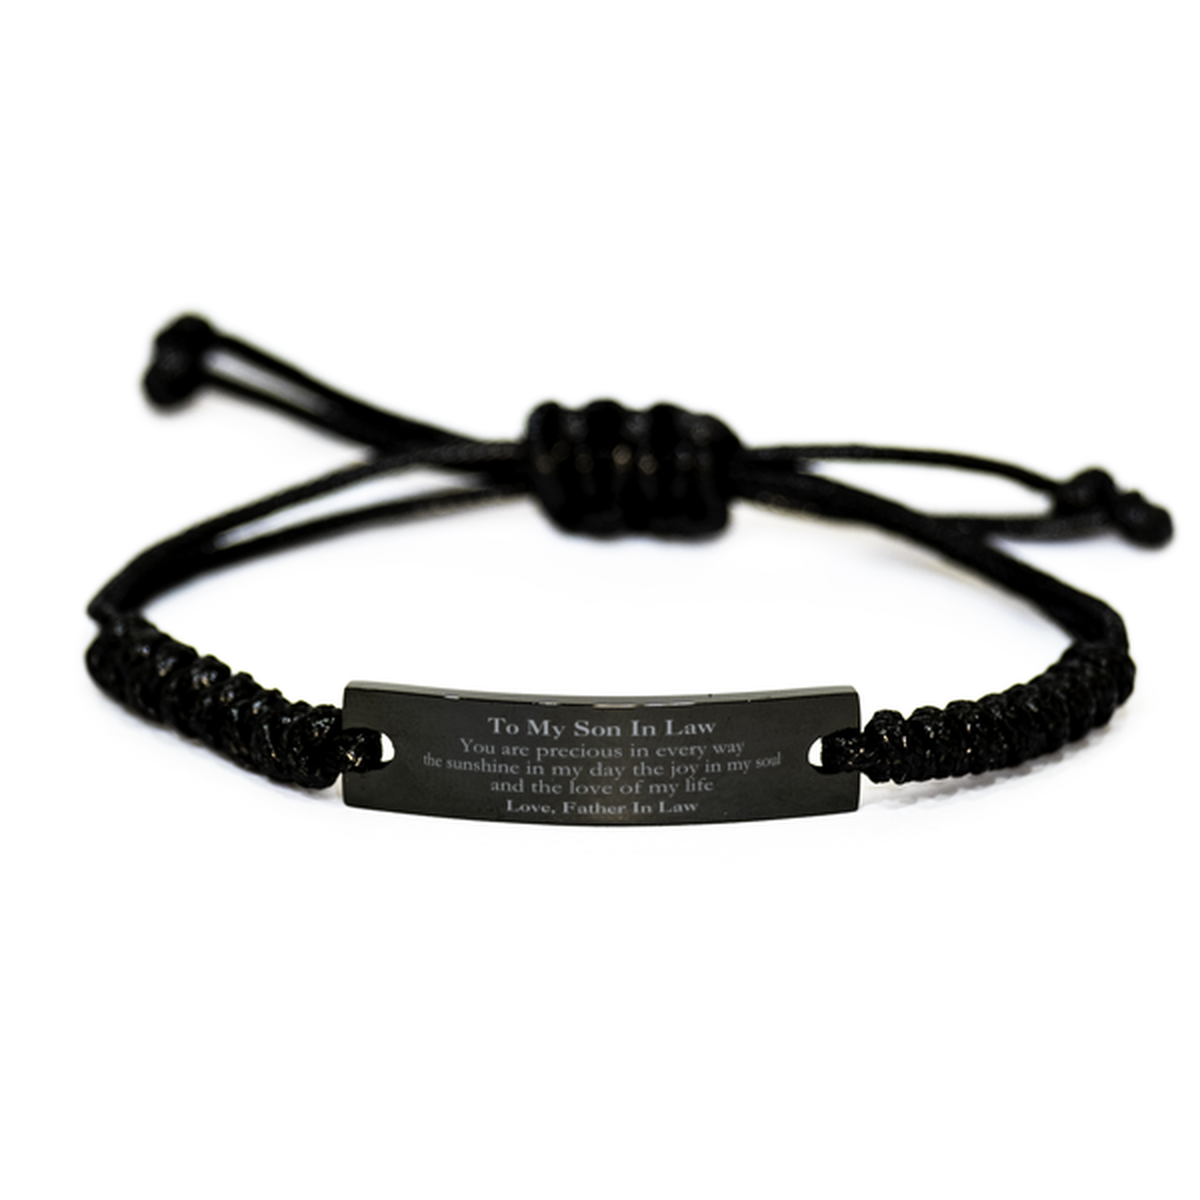 Graduation Gifts for Son In Law Black Rope Bracelet Present from Father In Law, Christmas Son In Law Birthday Gifts Son In Law You are precious in every way the sunshine in my day. Love, Father In Law